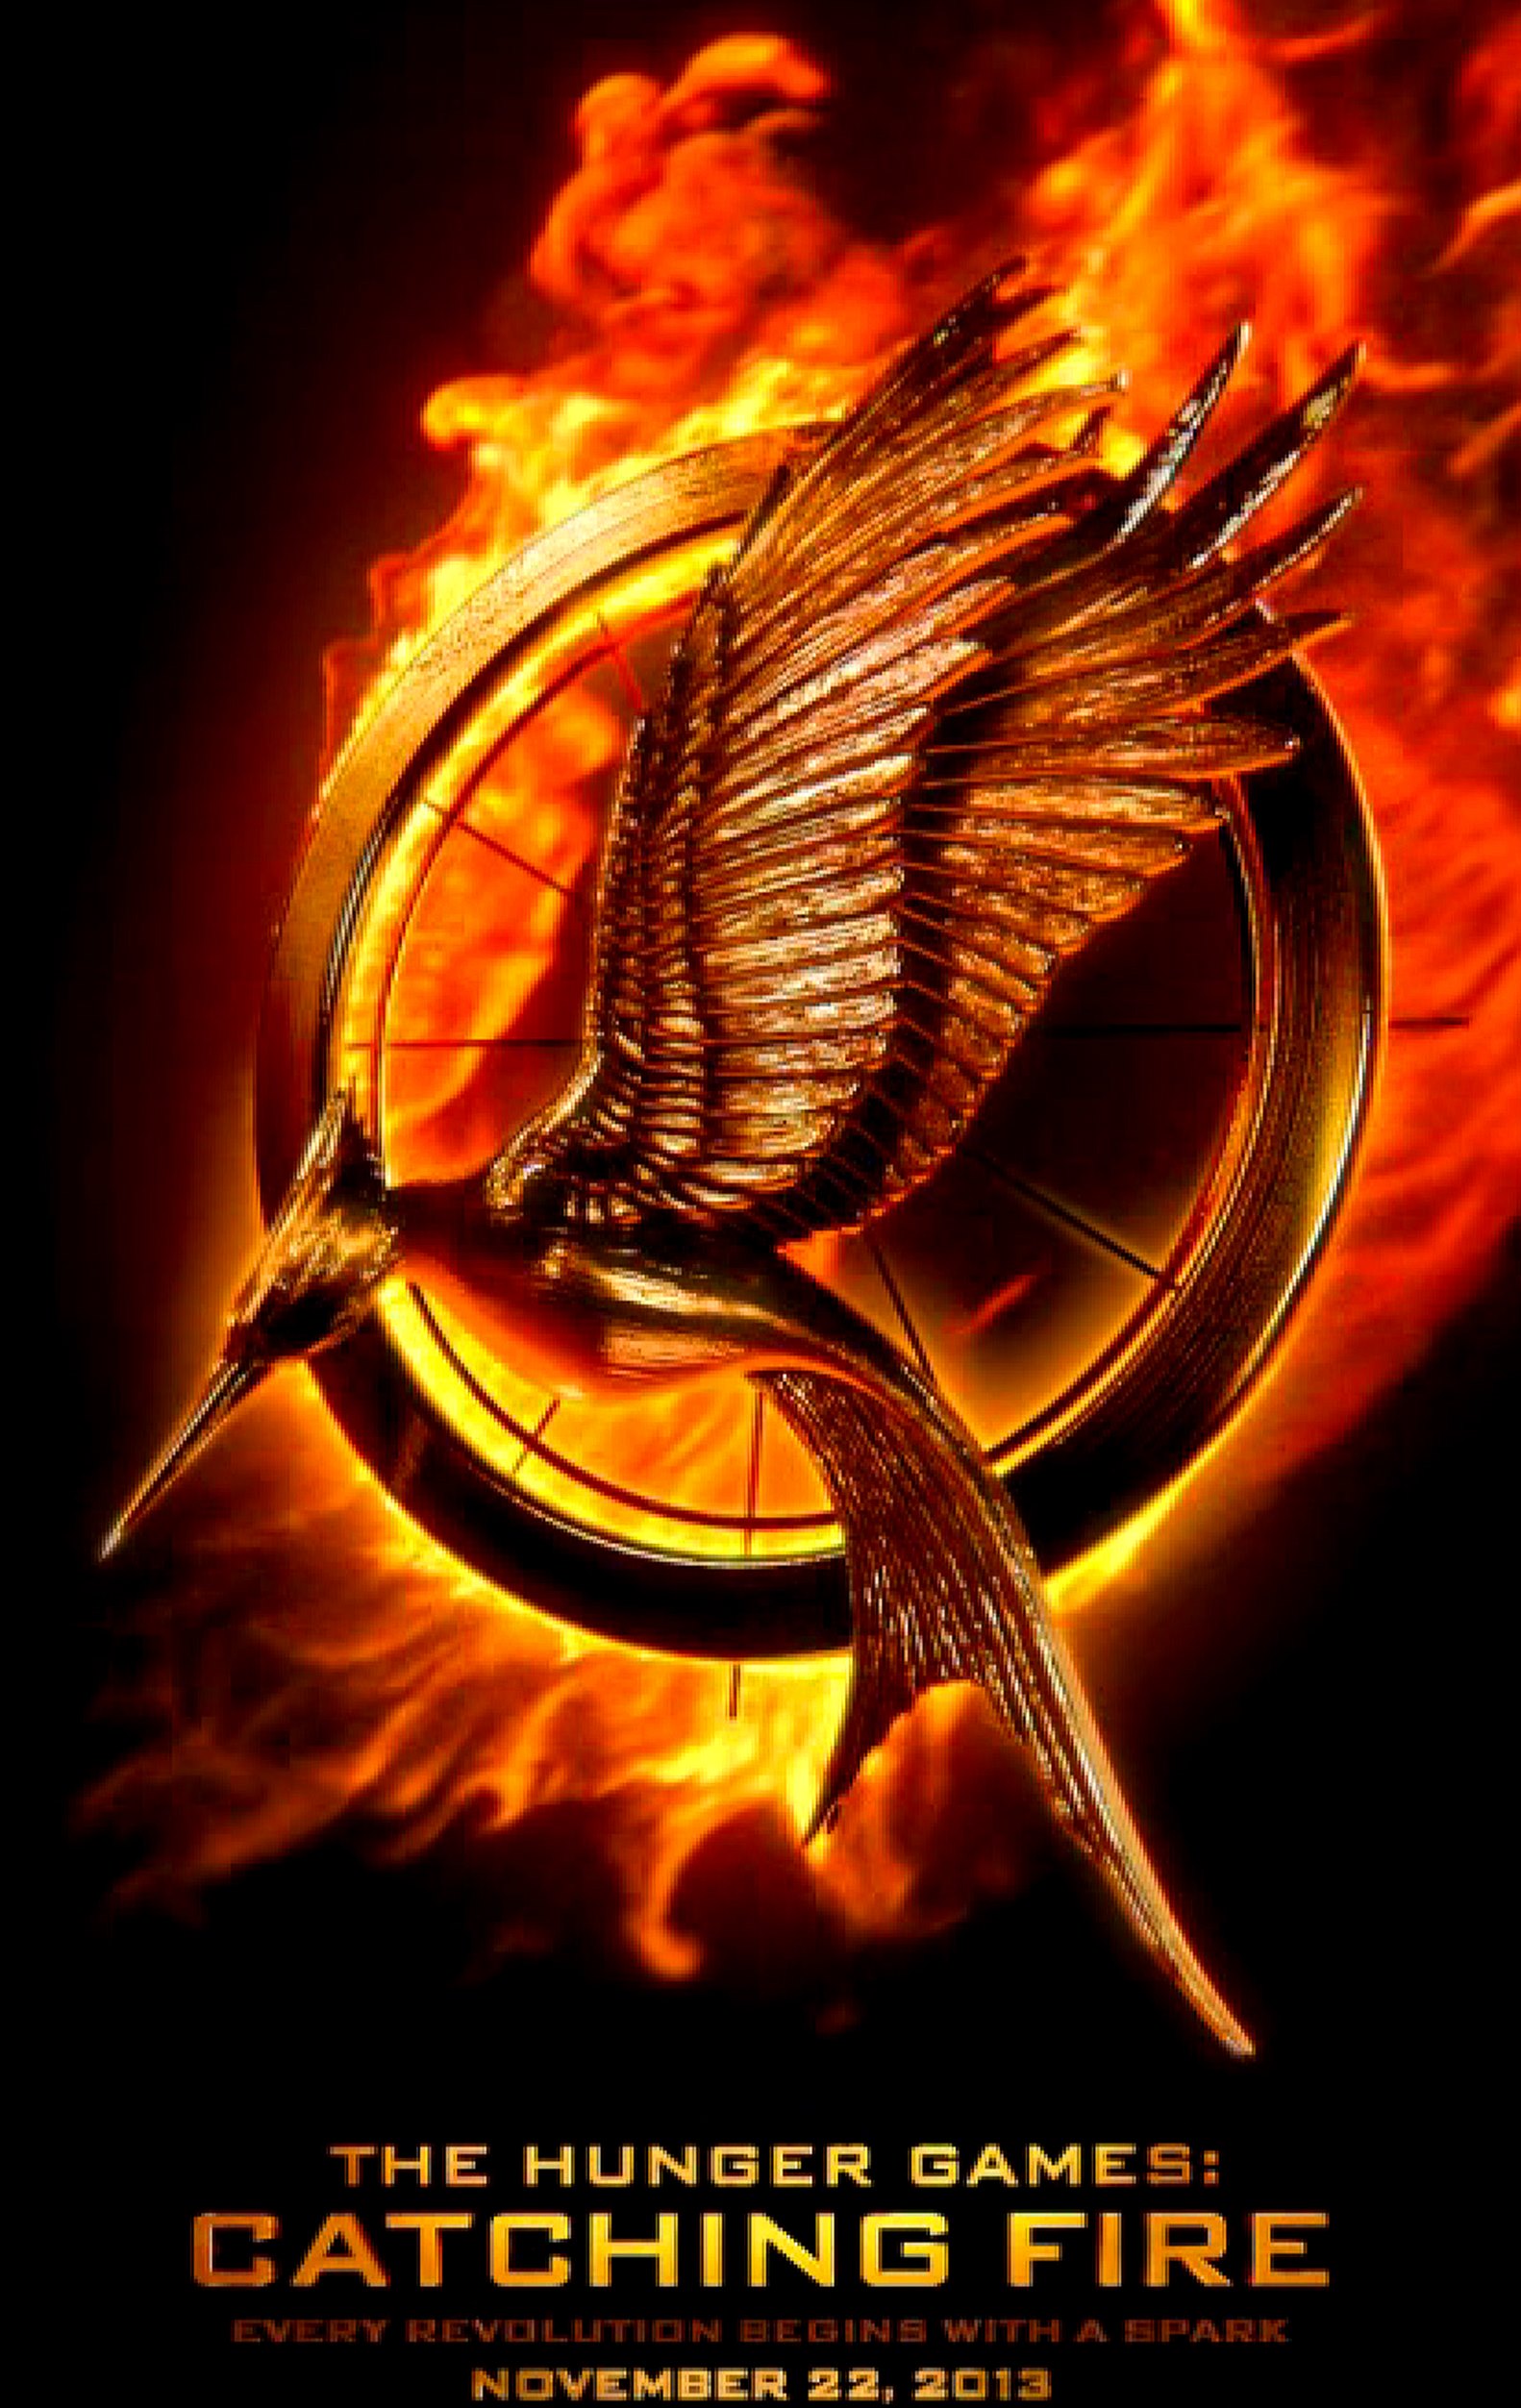 download the new version for windows The Hunger Games: Catching Fire